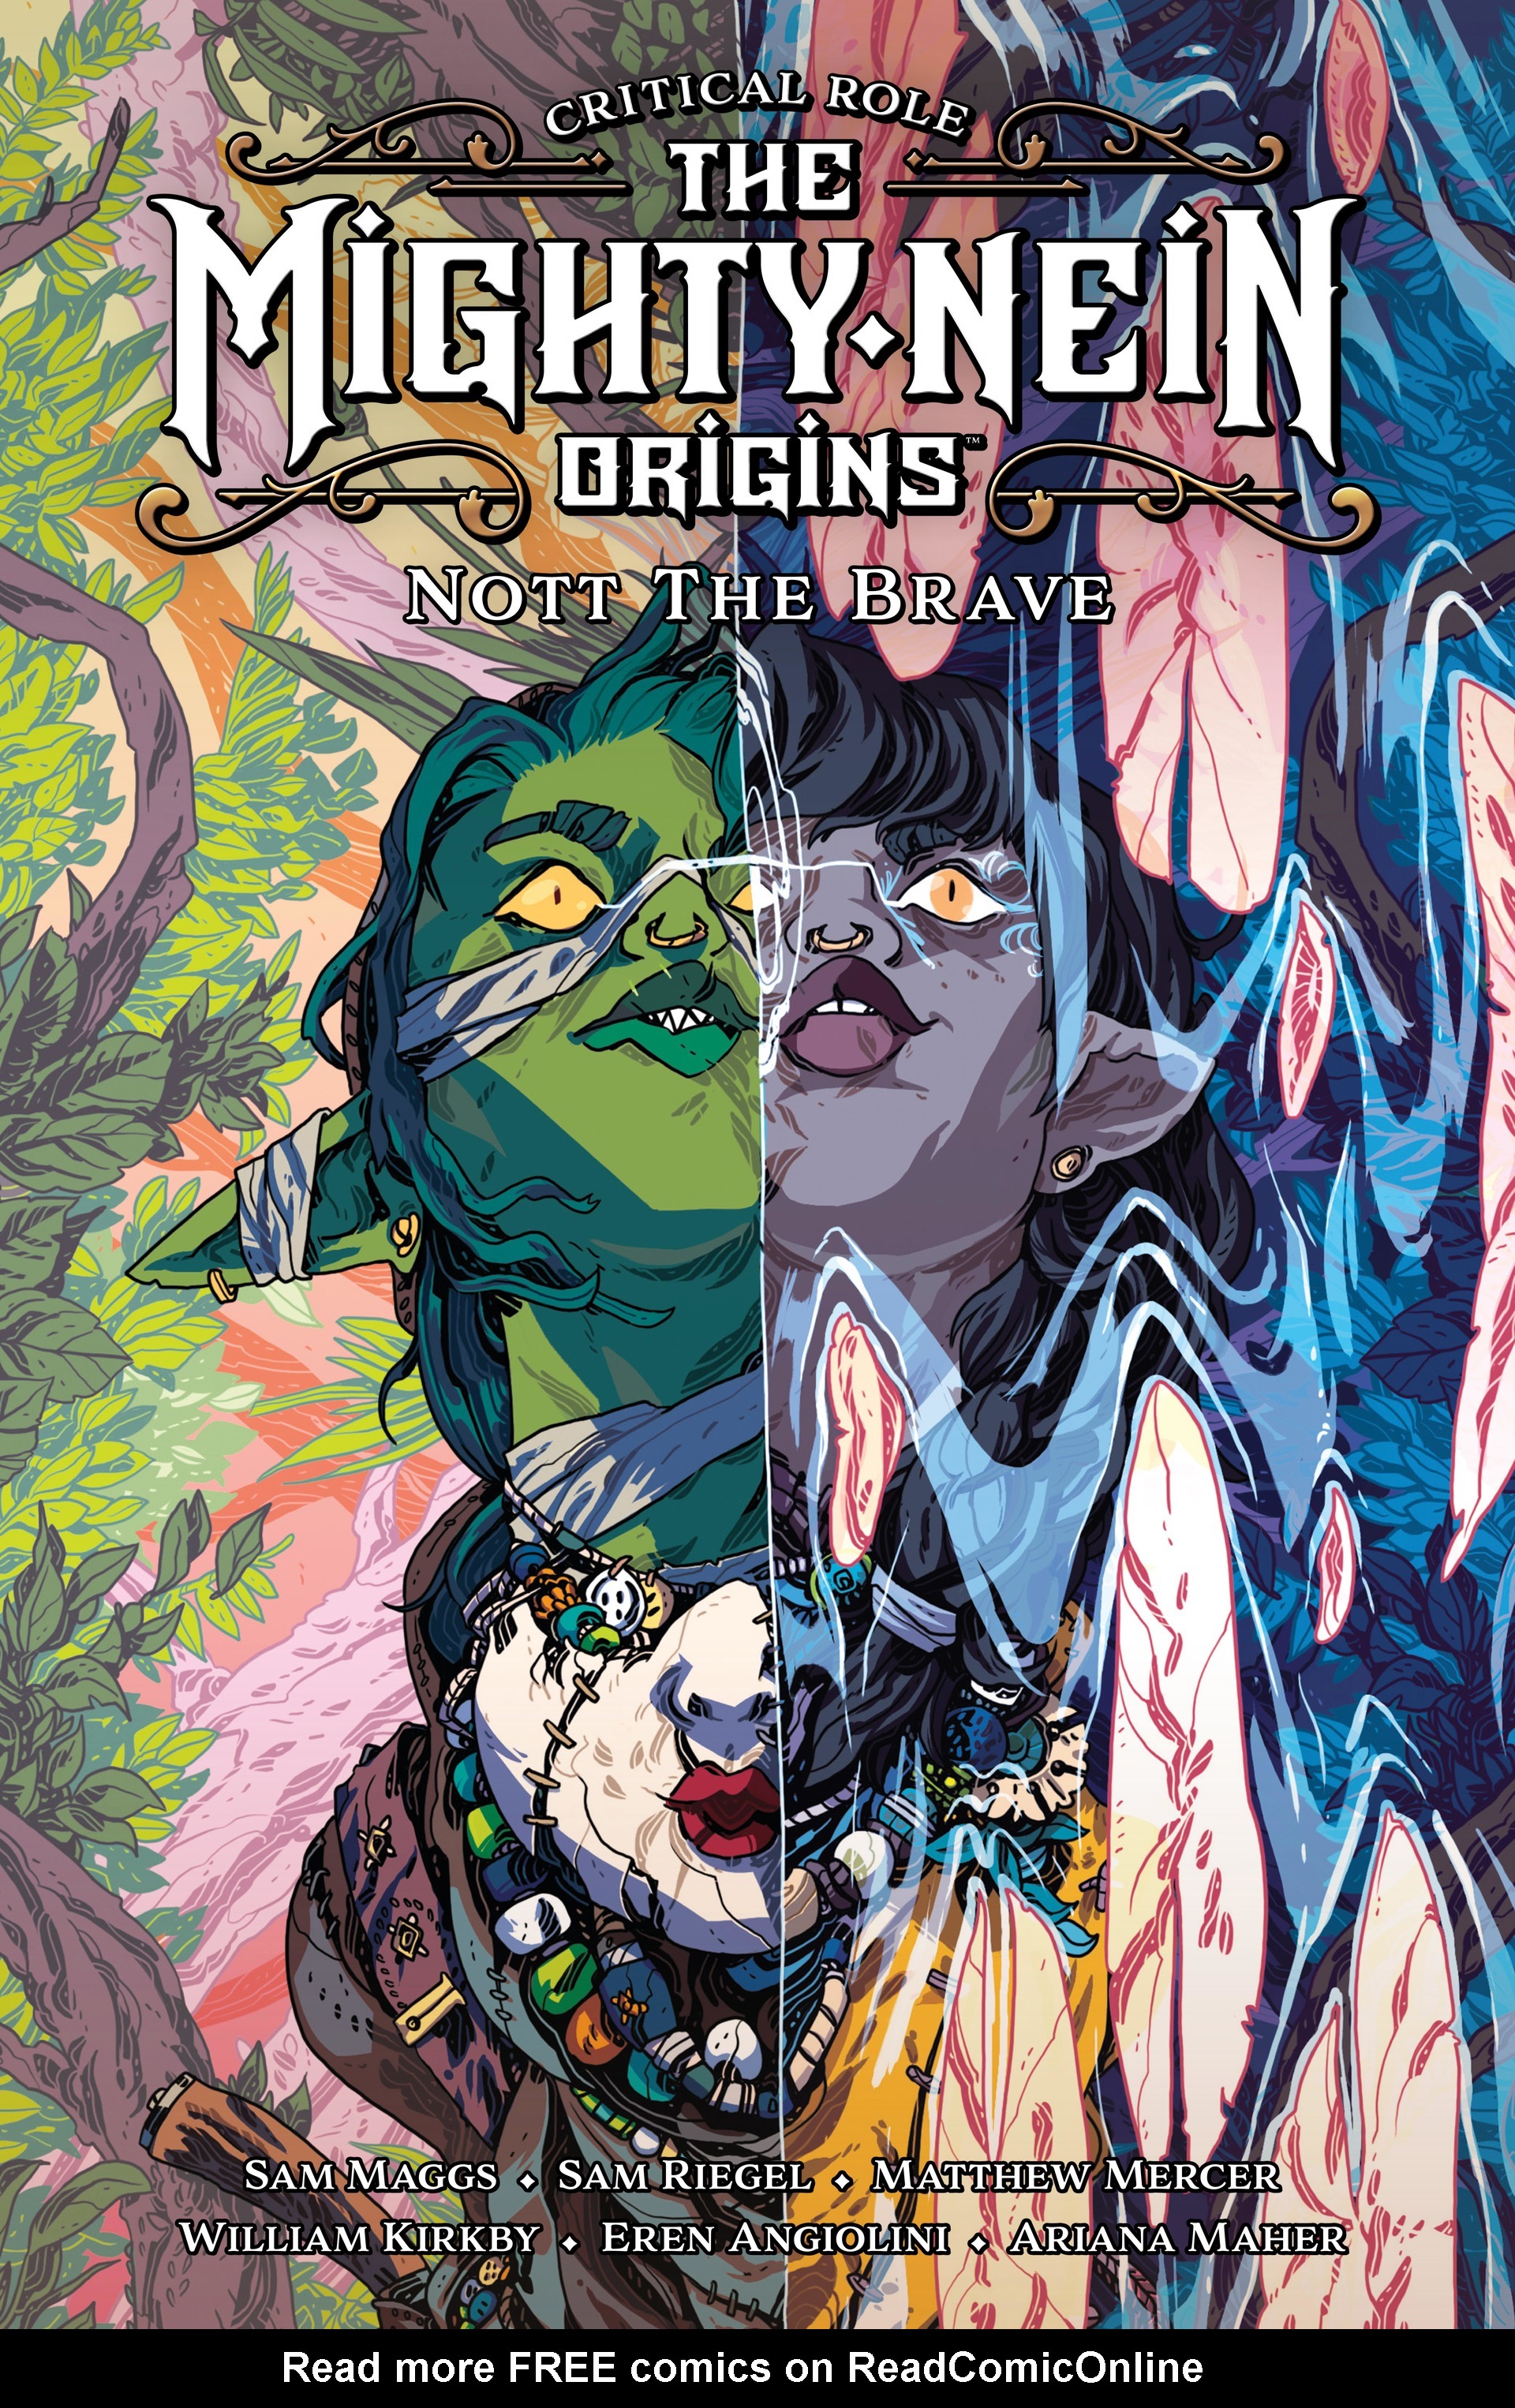 Read online Critical Role: The Mighty Nein Origins - Nott the Brave comic -  Issue # Full - 1